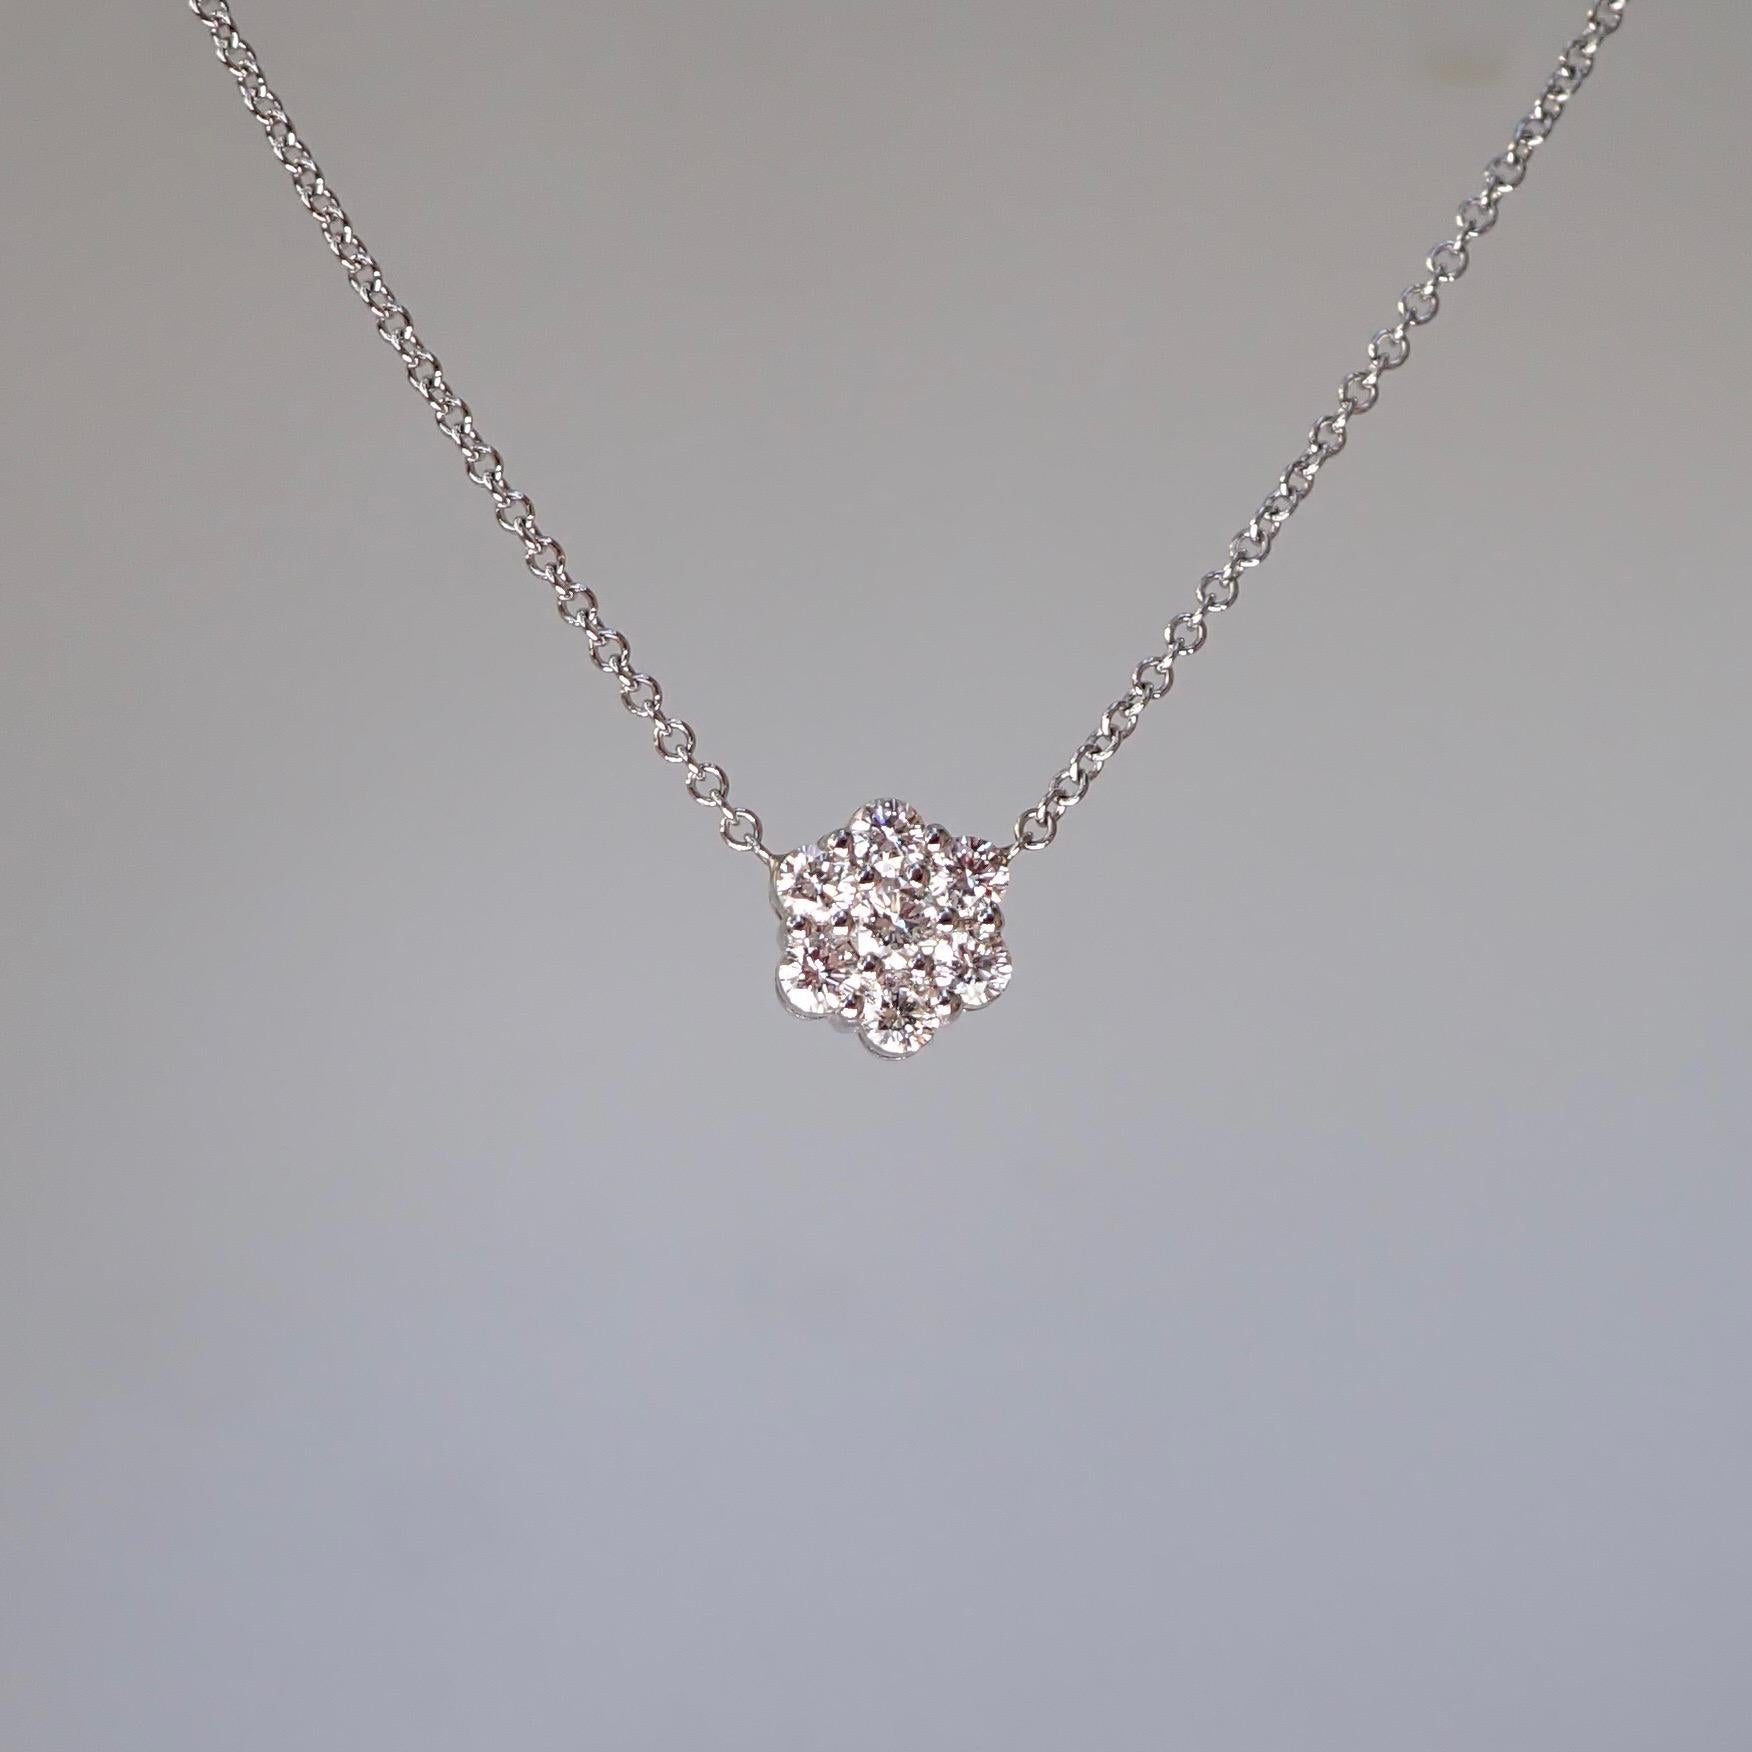 Contemporary 18k White Gold Pendant with 0.44 Carats of Diamond on Cable Chain For Sale